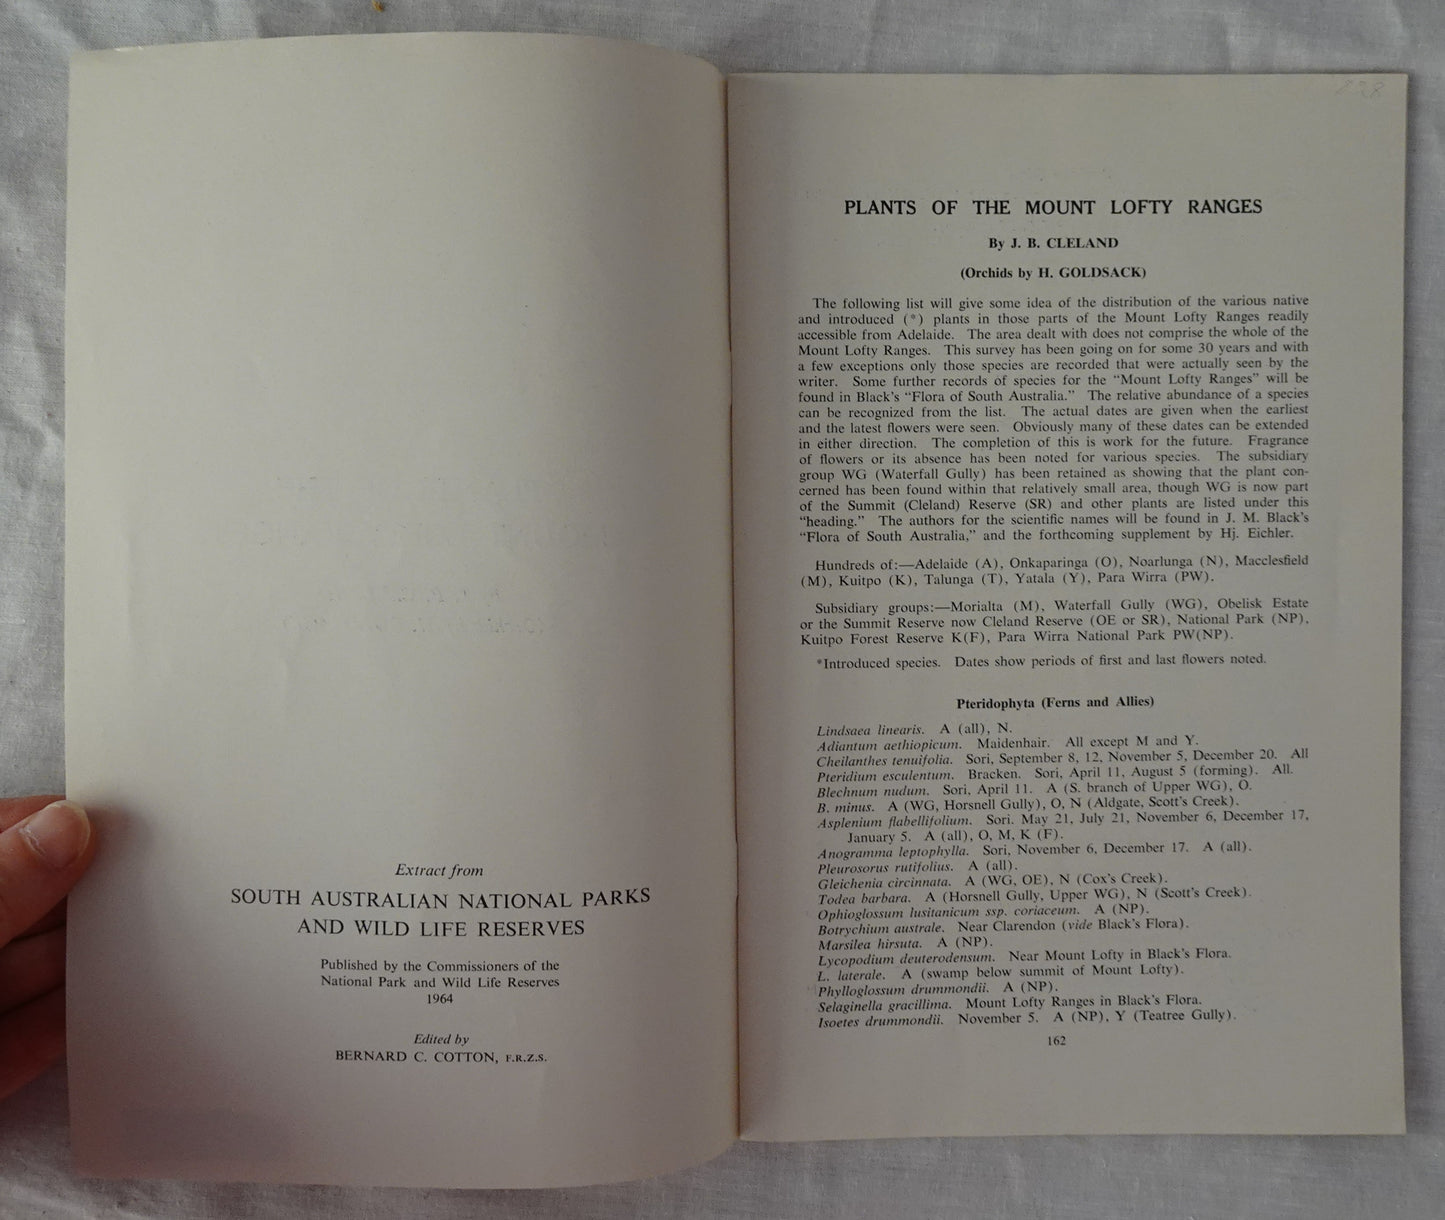 Plants of the Mount Lofty Ranges by J. B. Cleland